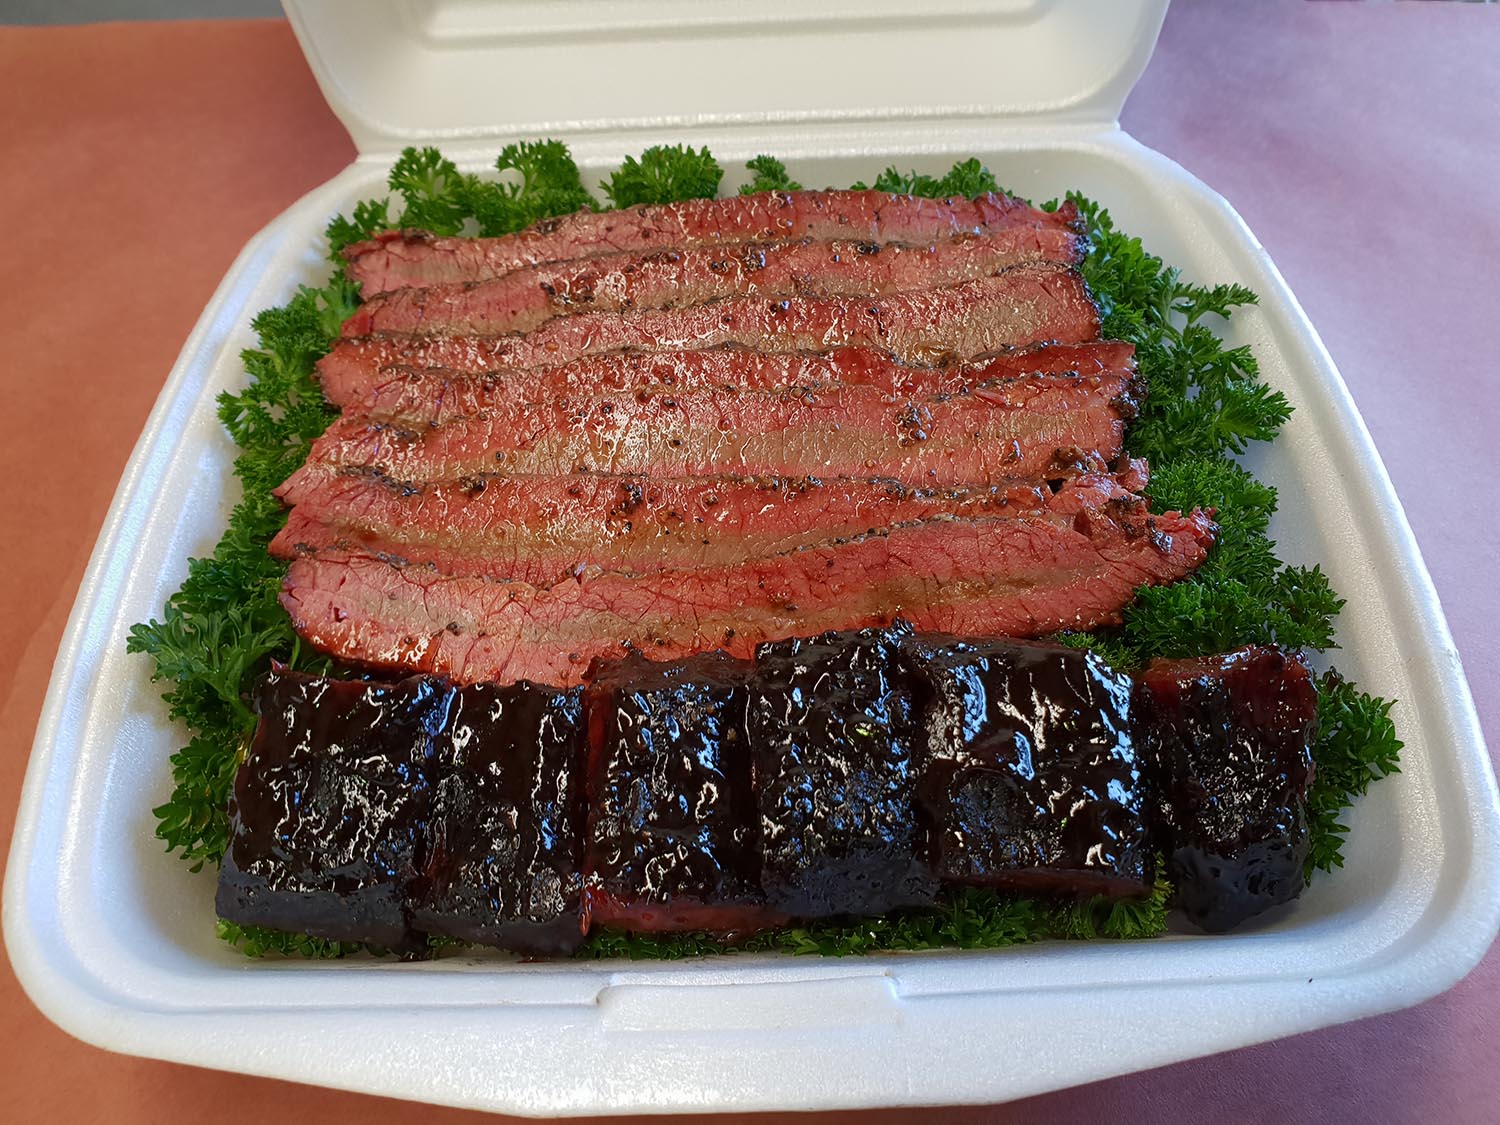 Picture of Brisket smoked in a charcoal Meat smoker at a BBQ Competition in Australia. A BBQ Smoker is widely used in competitions and as it is the best way to cook brisket and achieve results like in this photo